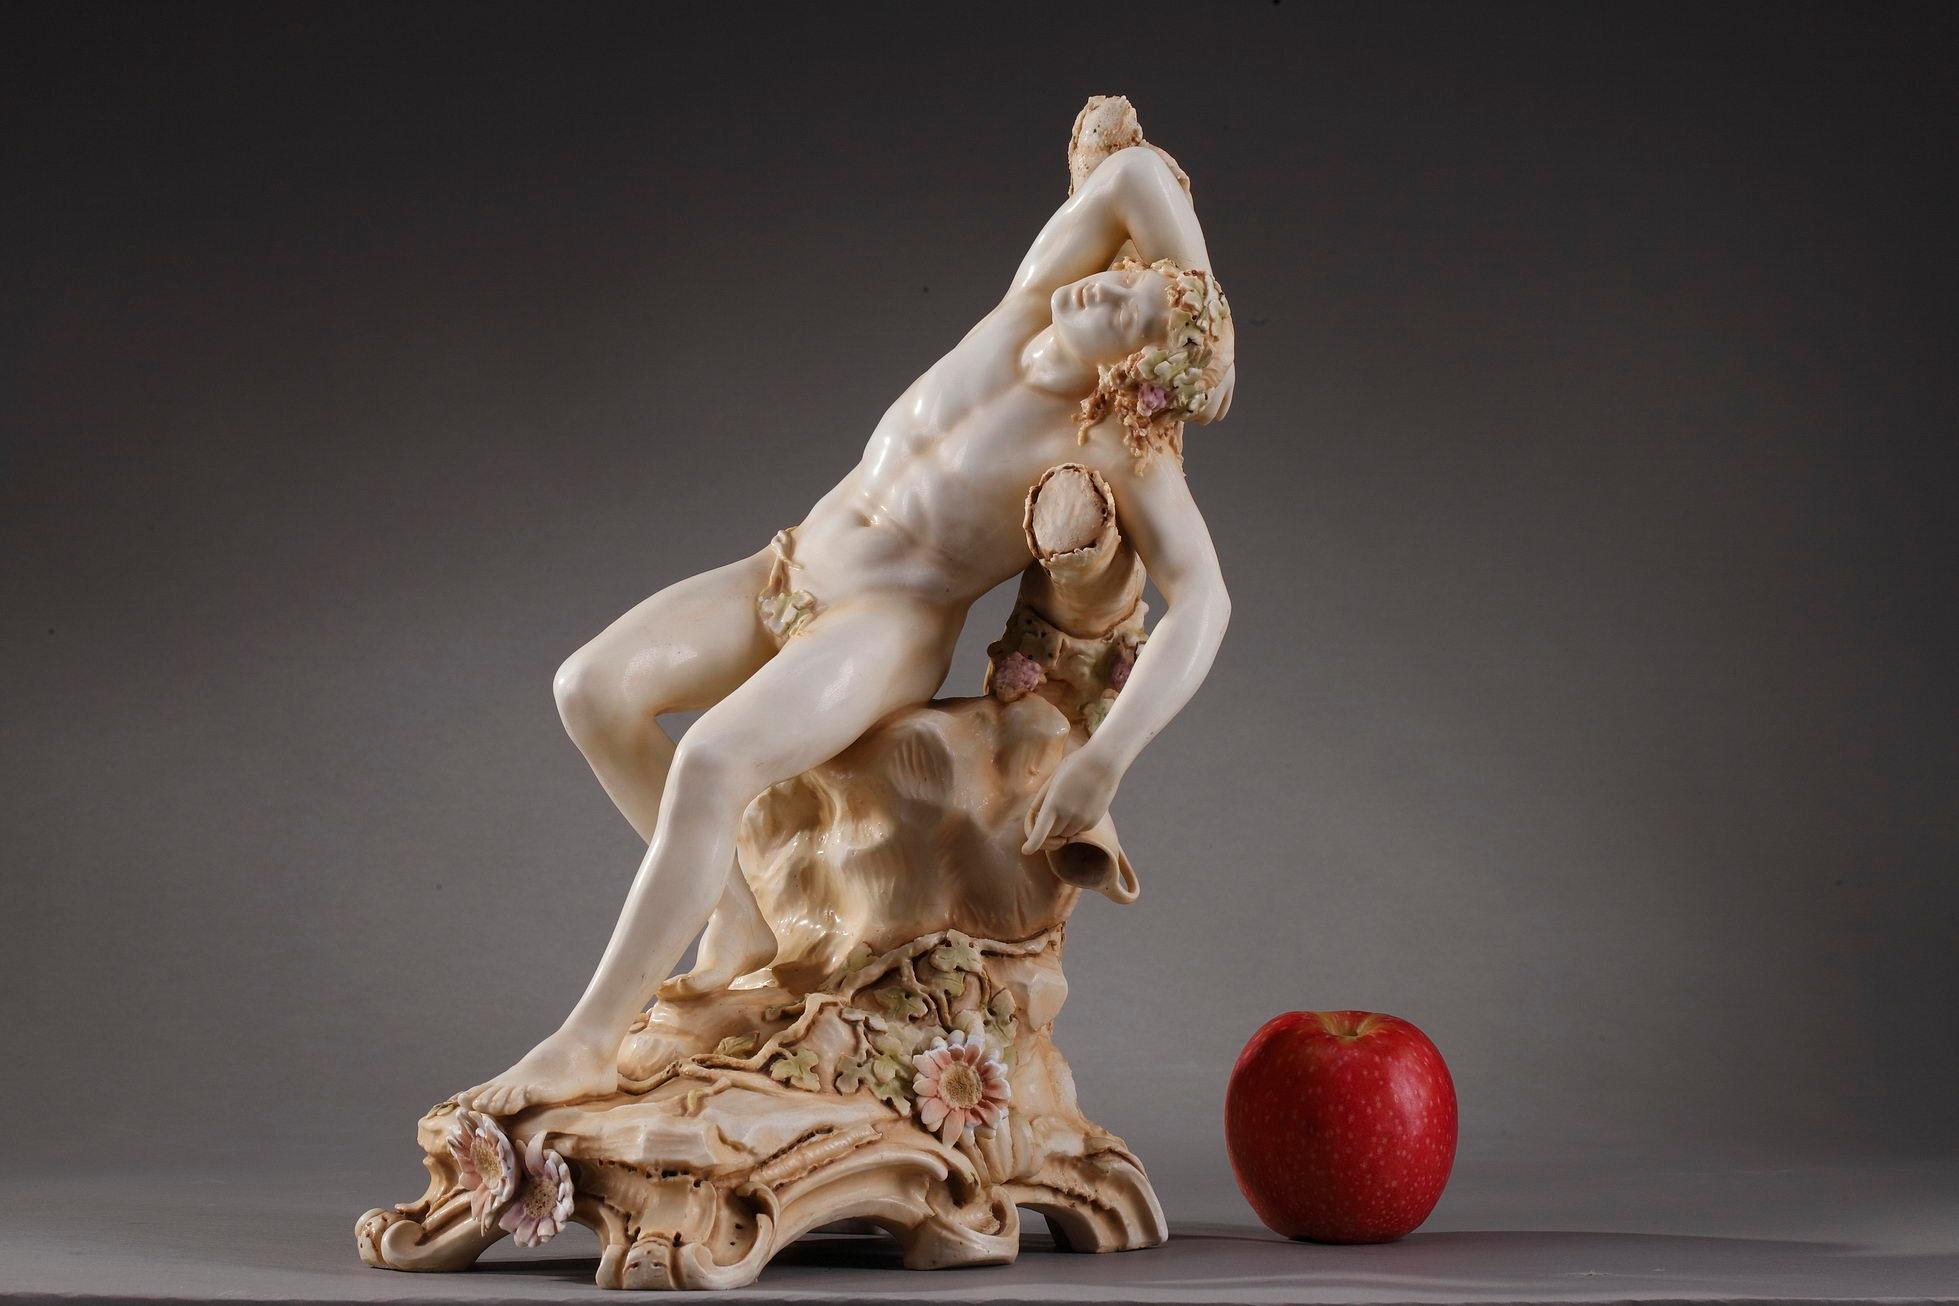 Small sculpture in Bohemian porcelain biscuit featuring Bacchus or Dionysus, the Ancient Greek god of wine and fertility, lying on a trunk decorated with cluster of grapes. He is naked, and wears a crown of vine leaves. The young god holds an empty